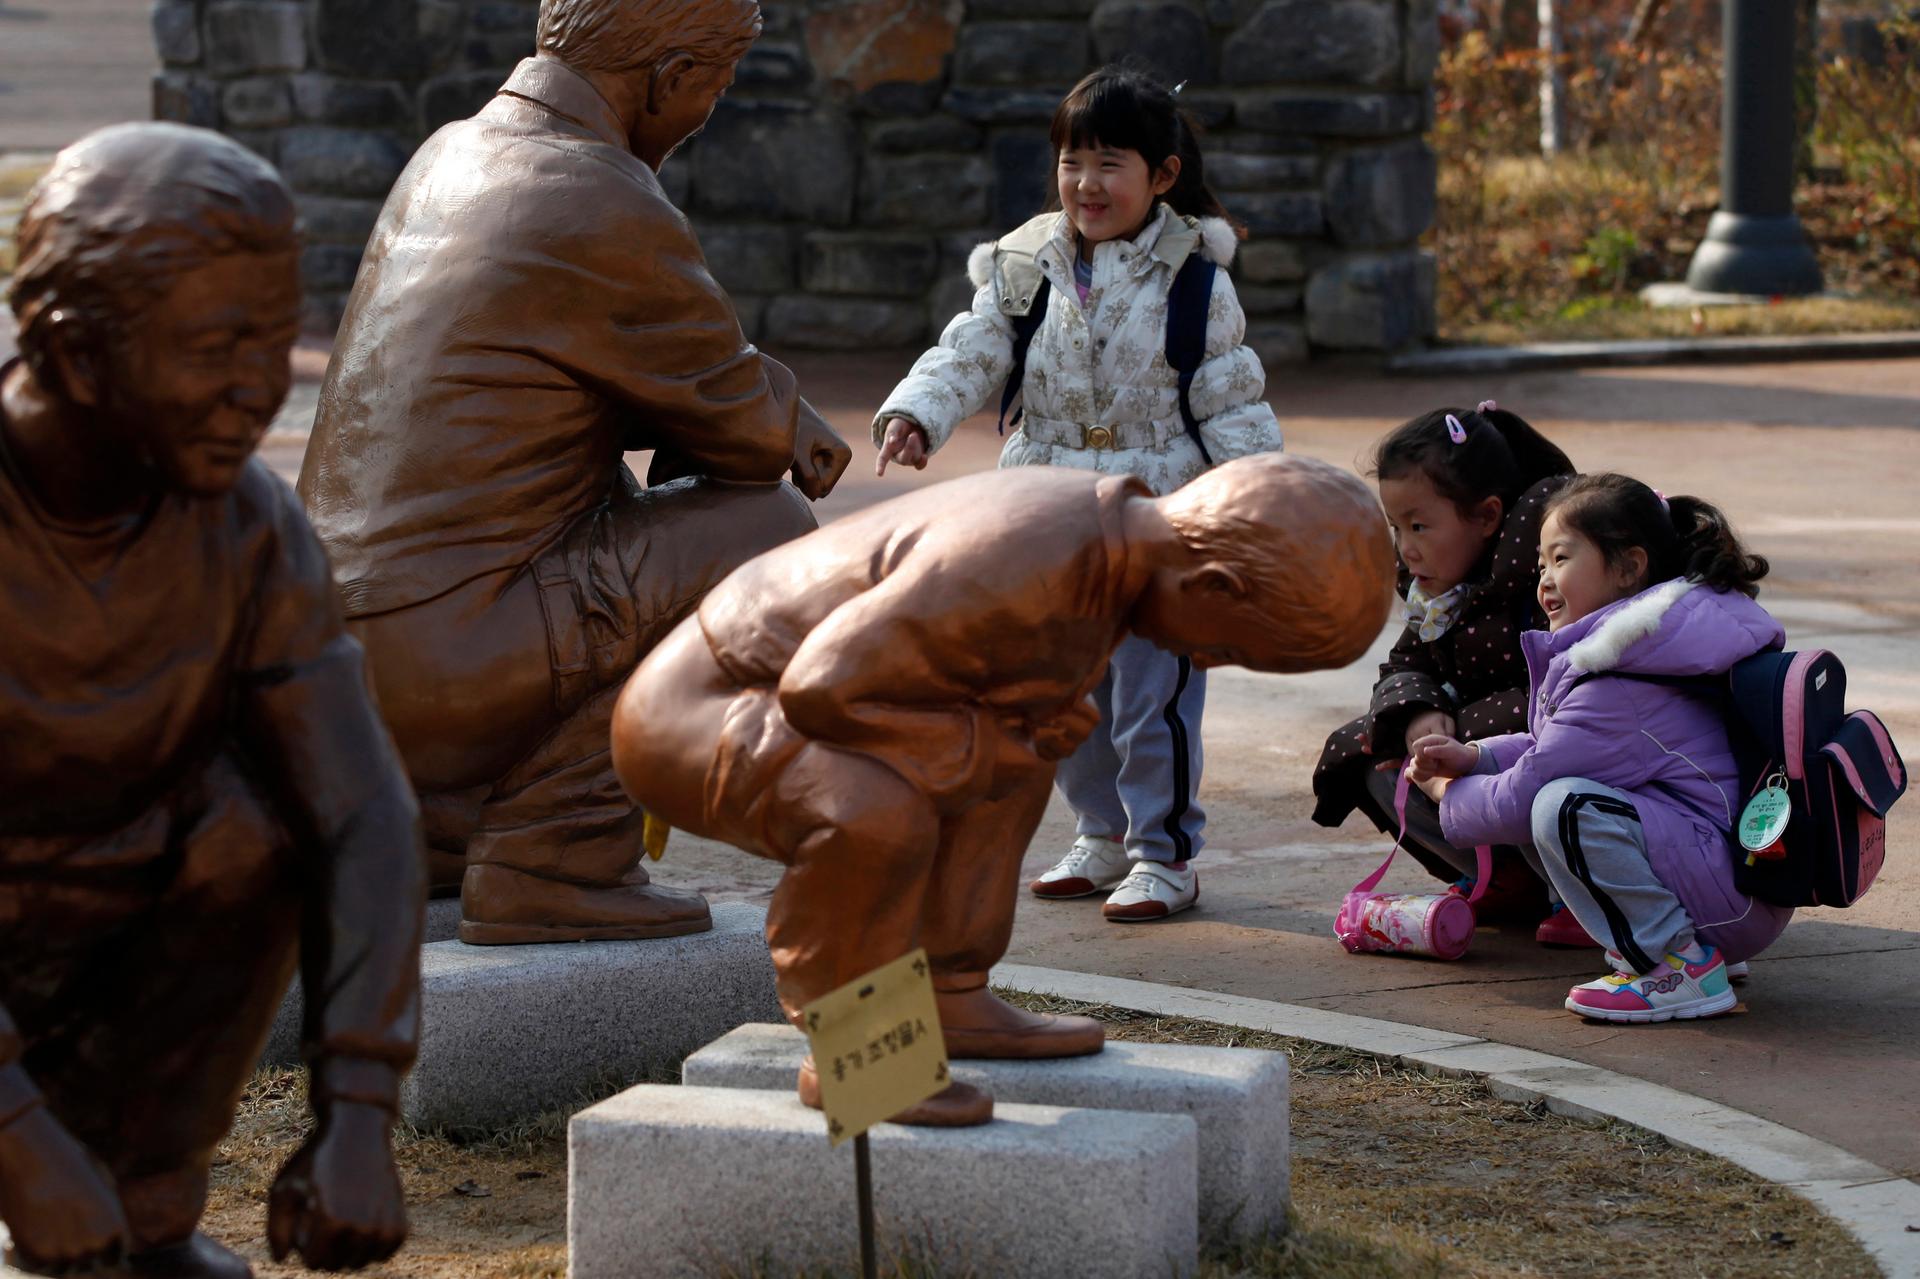 Children visit the Toilet Culture Park in Suwon, South Korea (about 29 miles south of Seoul) on November 22, 2012.